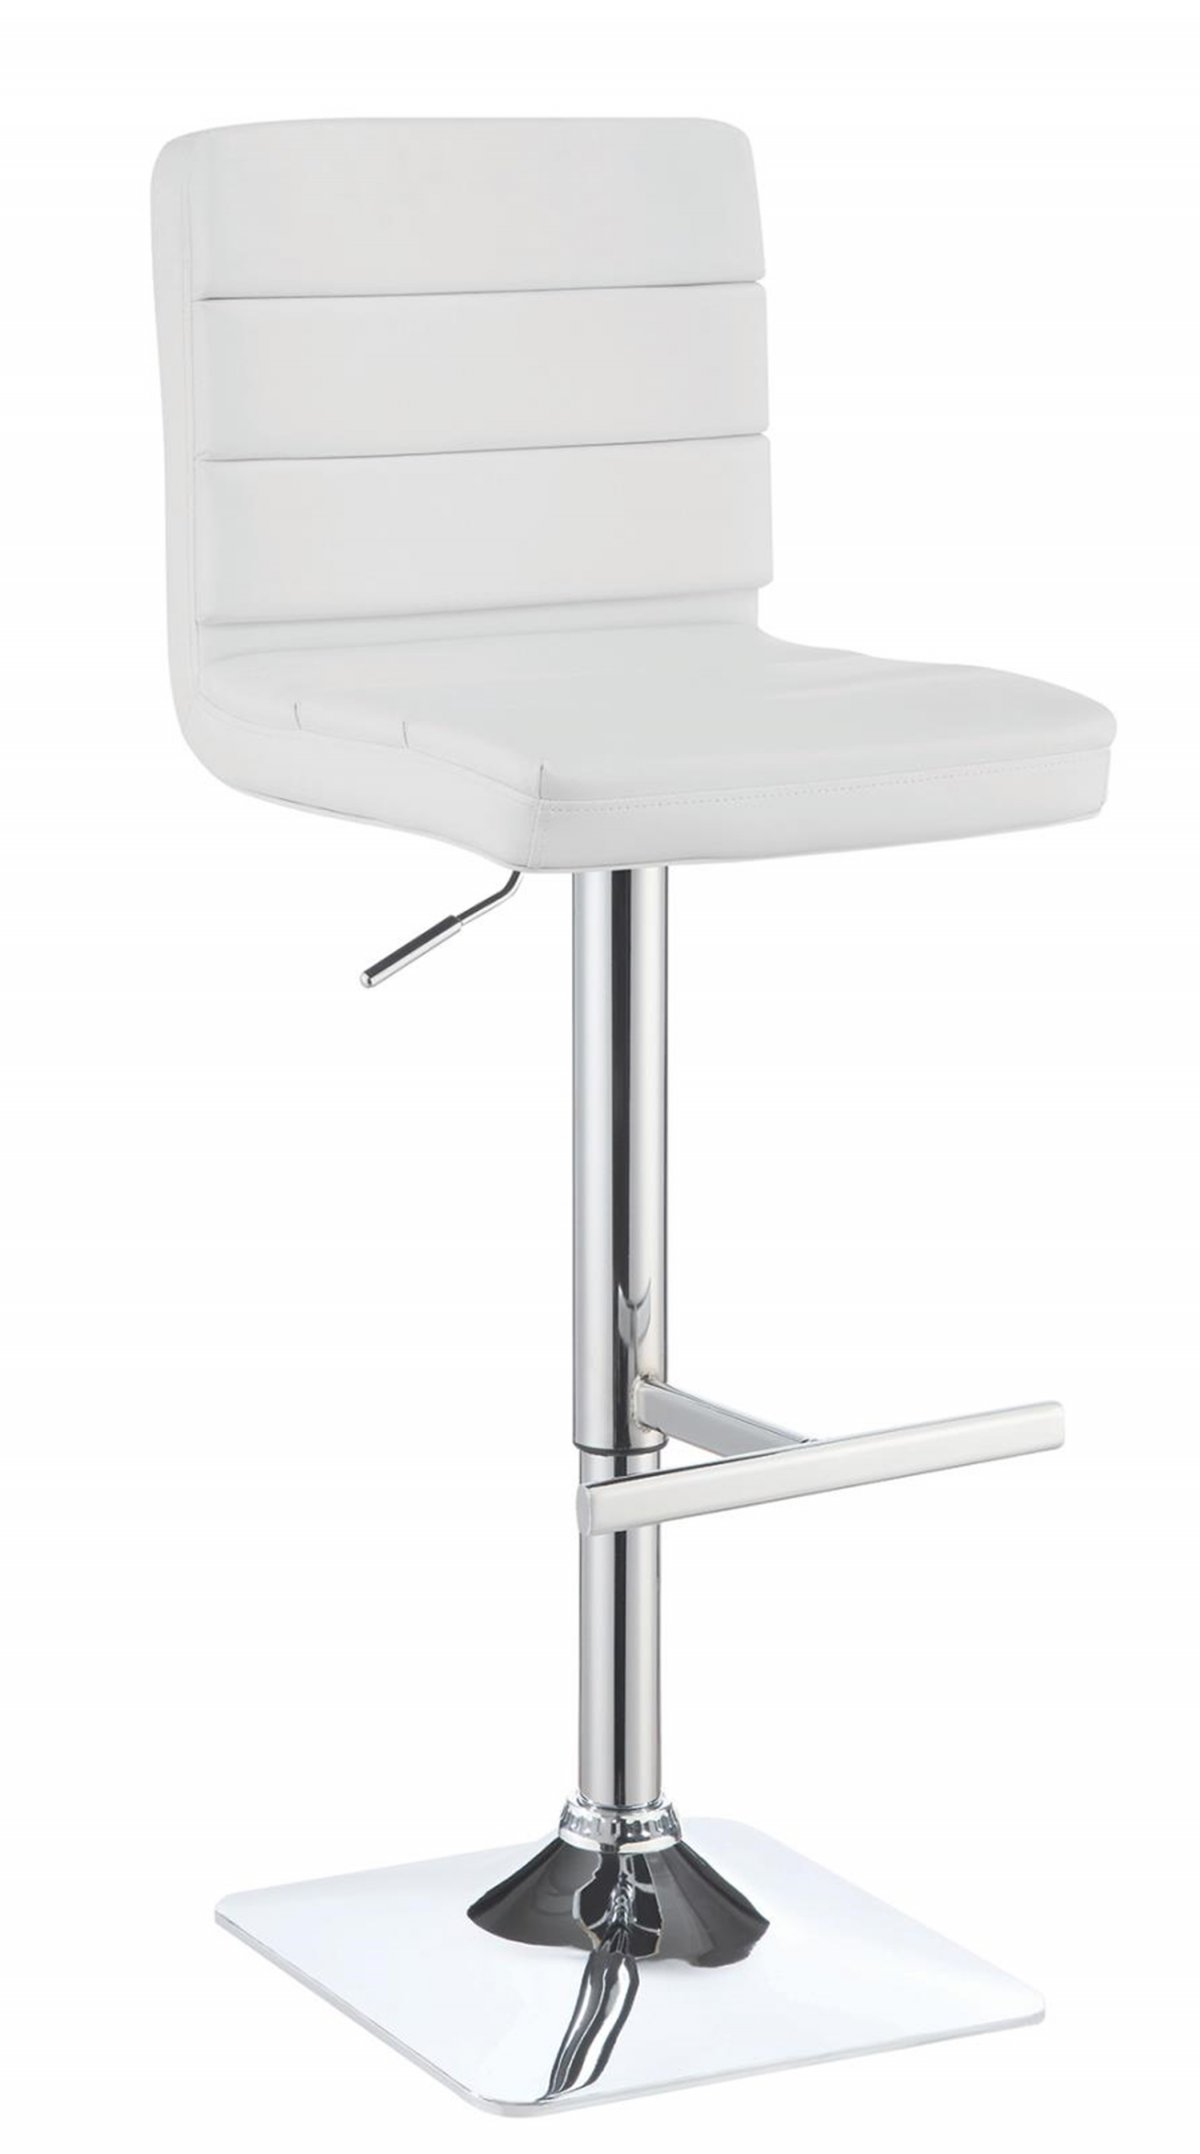 Contemporary Adjustable White Bar Stool with Chrome Finish